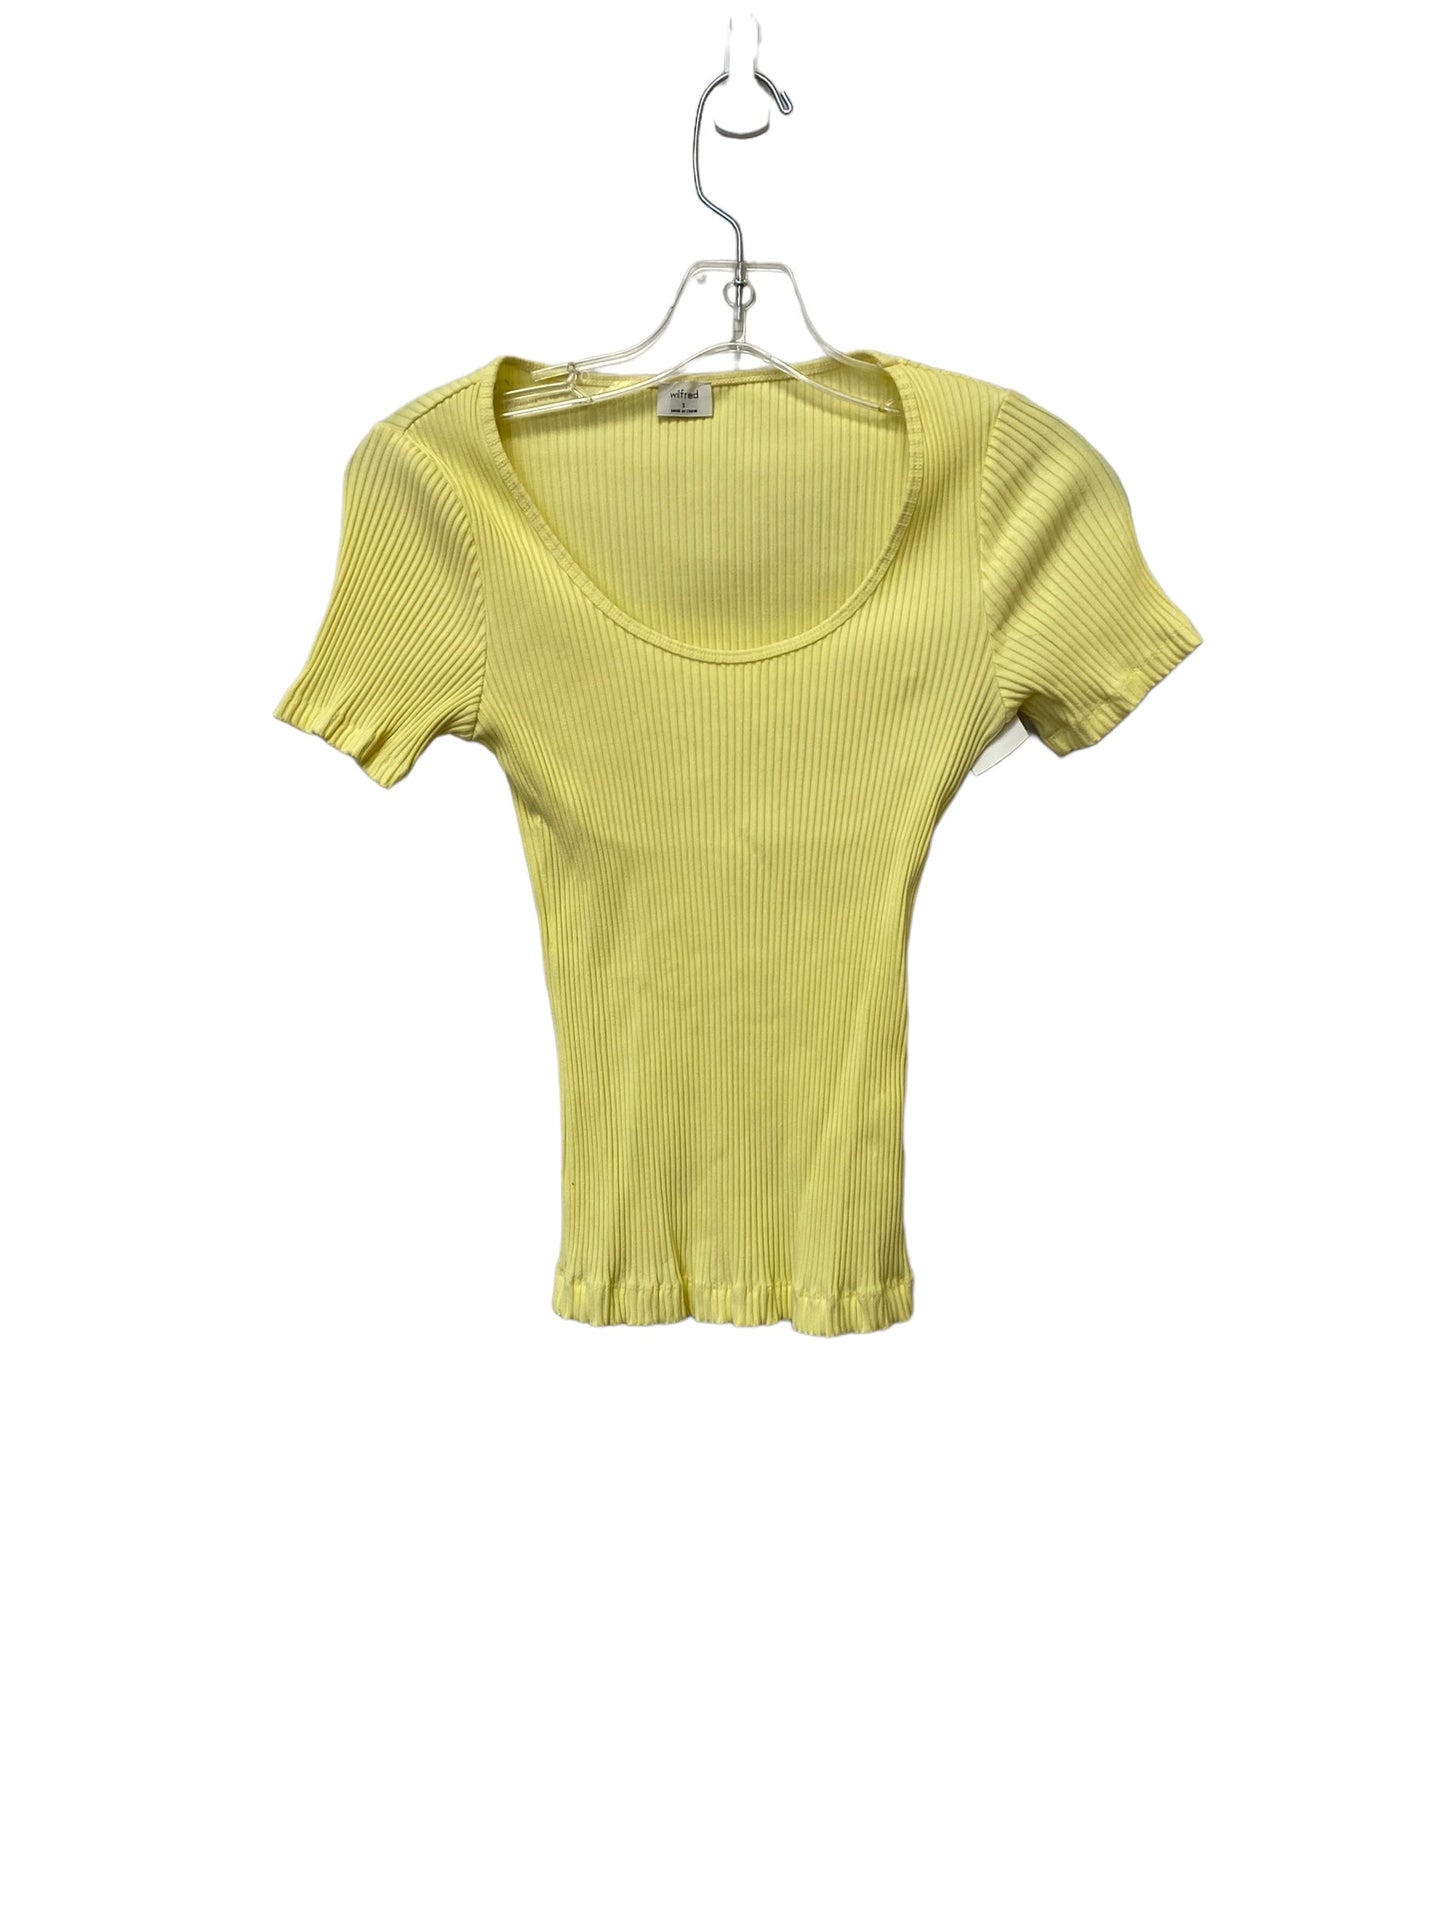 Yellow Top Short Sleeve Wilfred, Size S